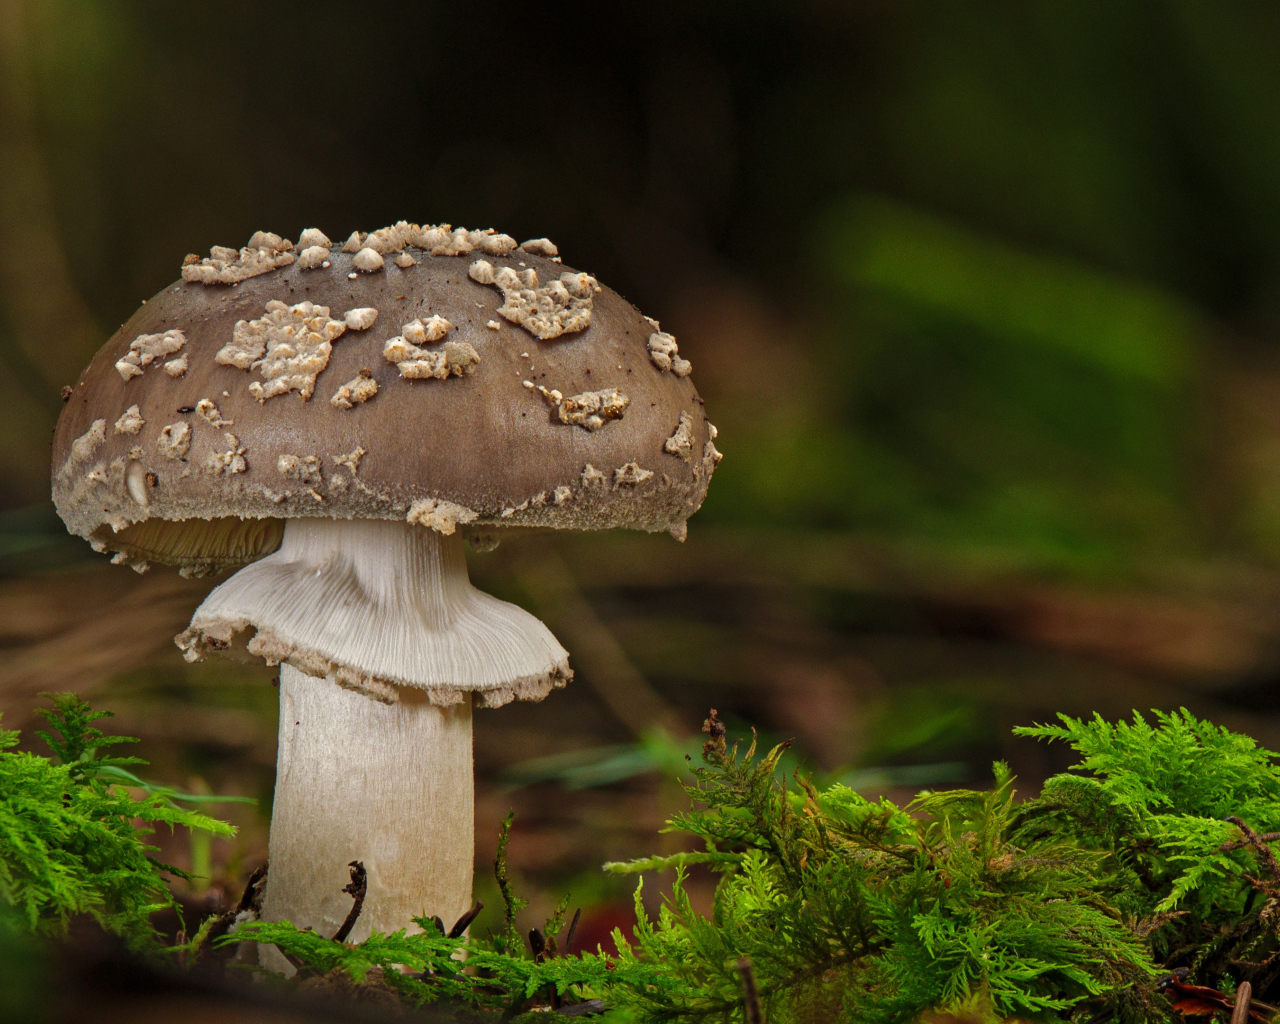 Mushroom with green moss in the forest